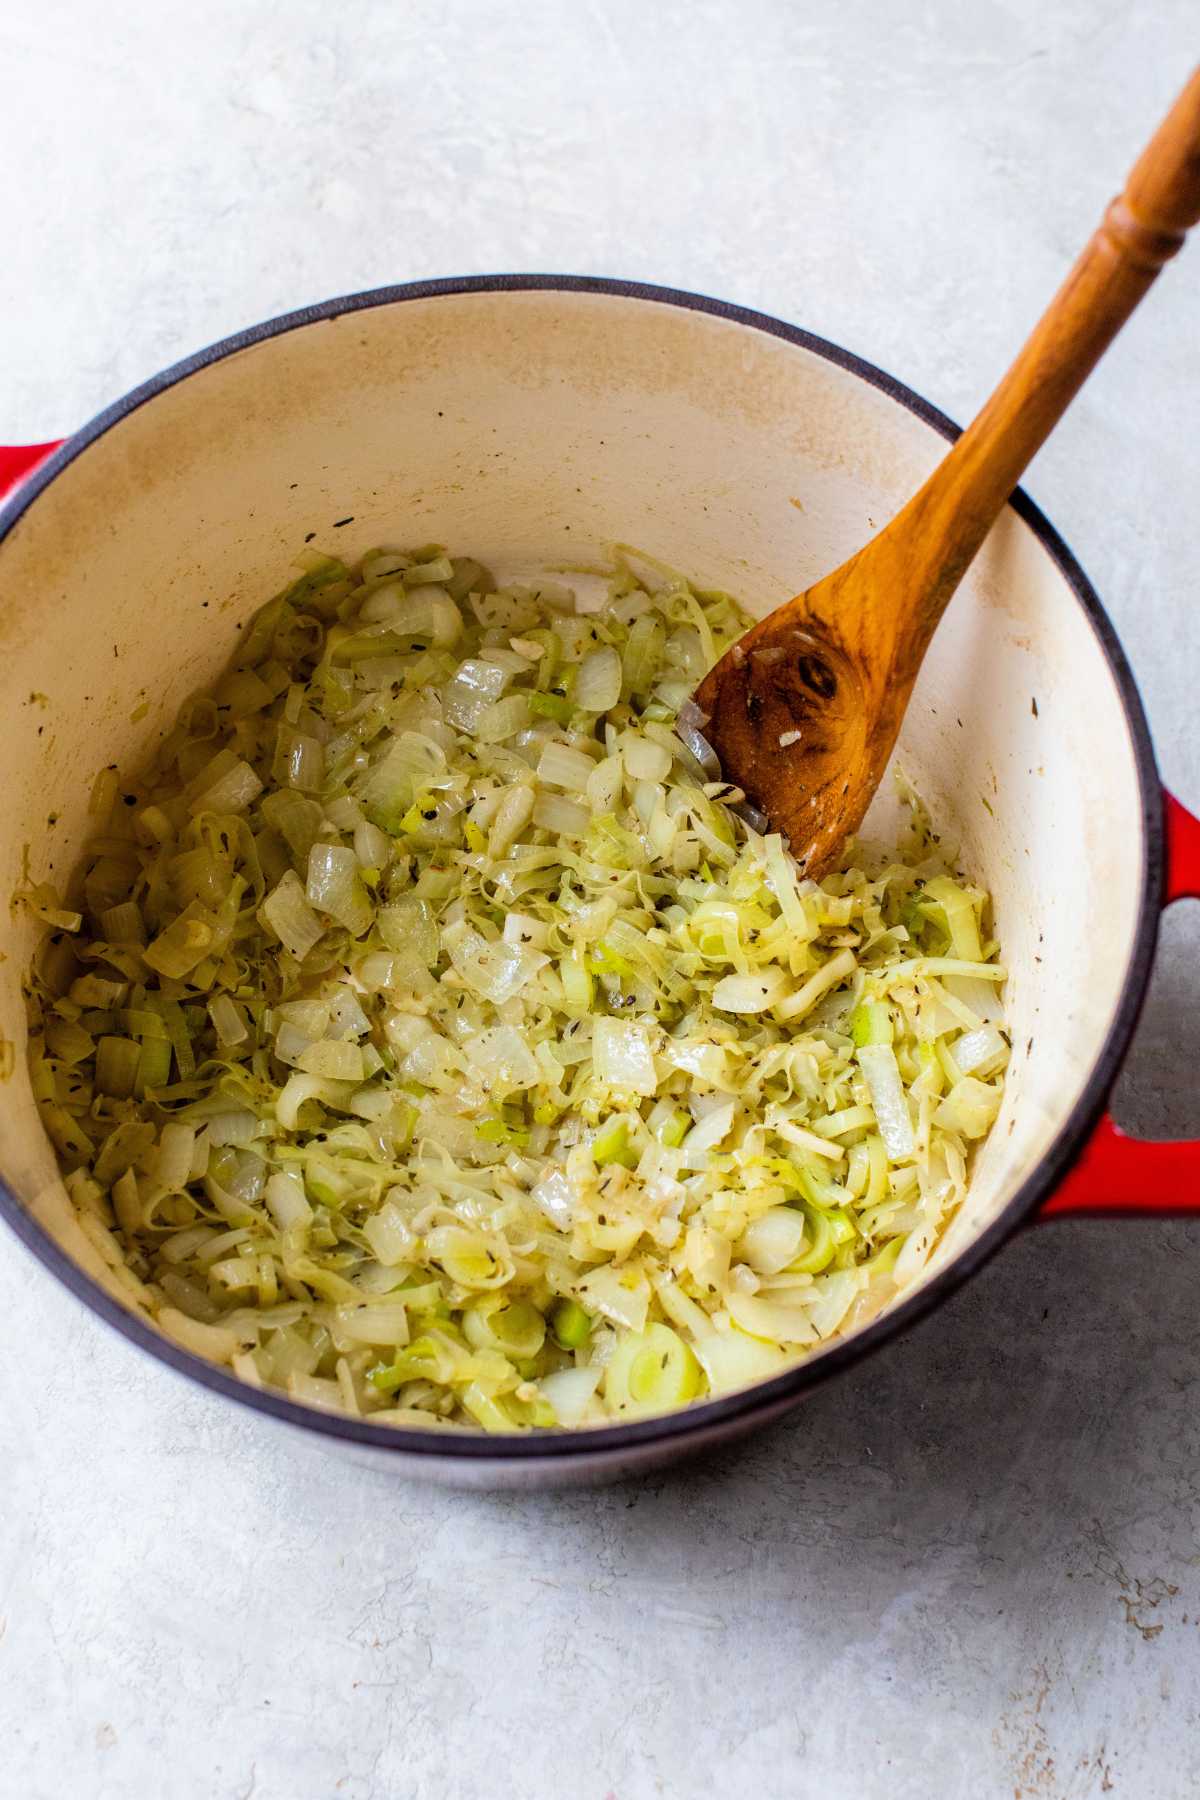 Stirring onions and leeks sautéing in a large pot.